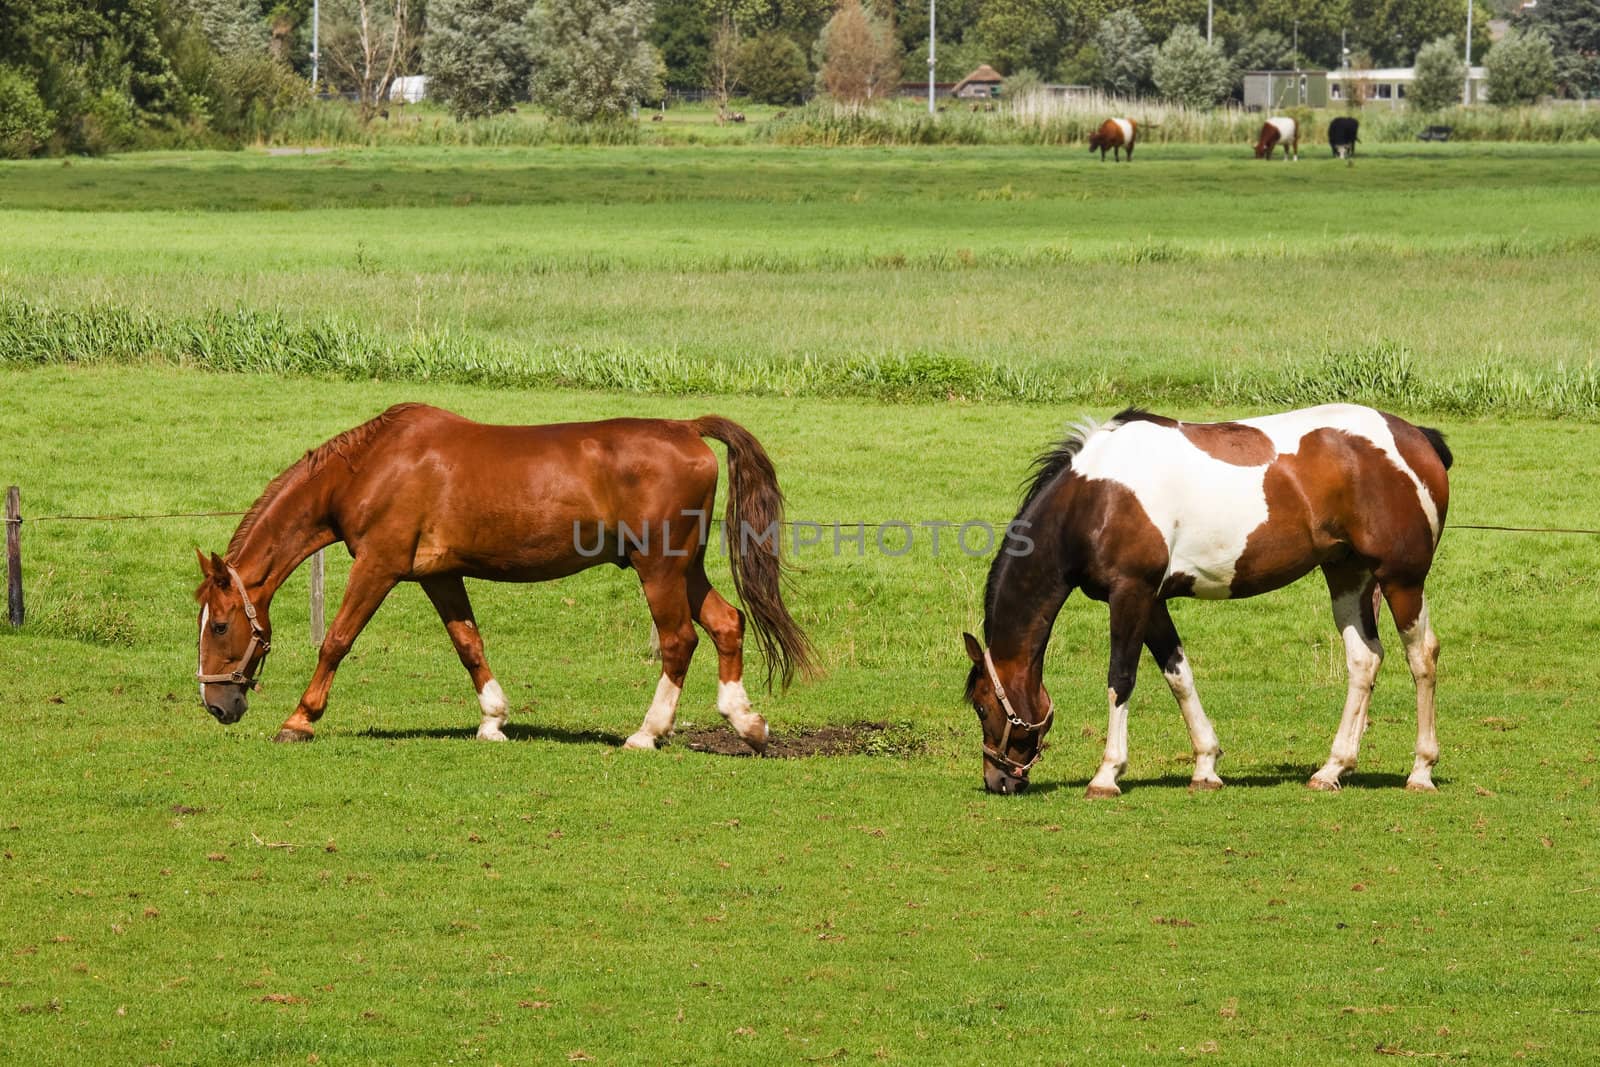 Two horses on sunny summerday in the country grazing on grassland